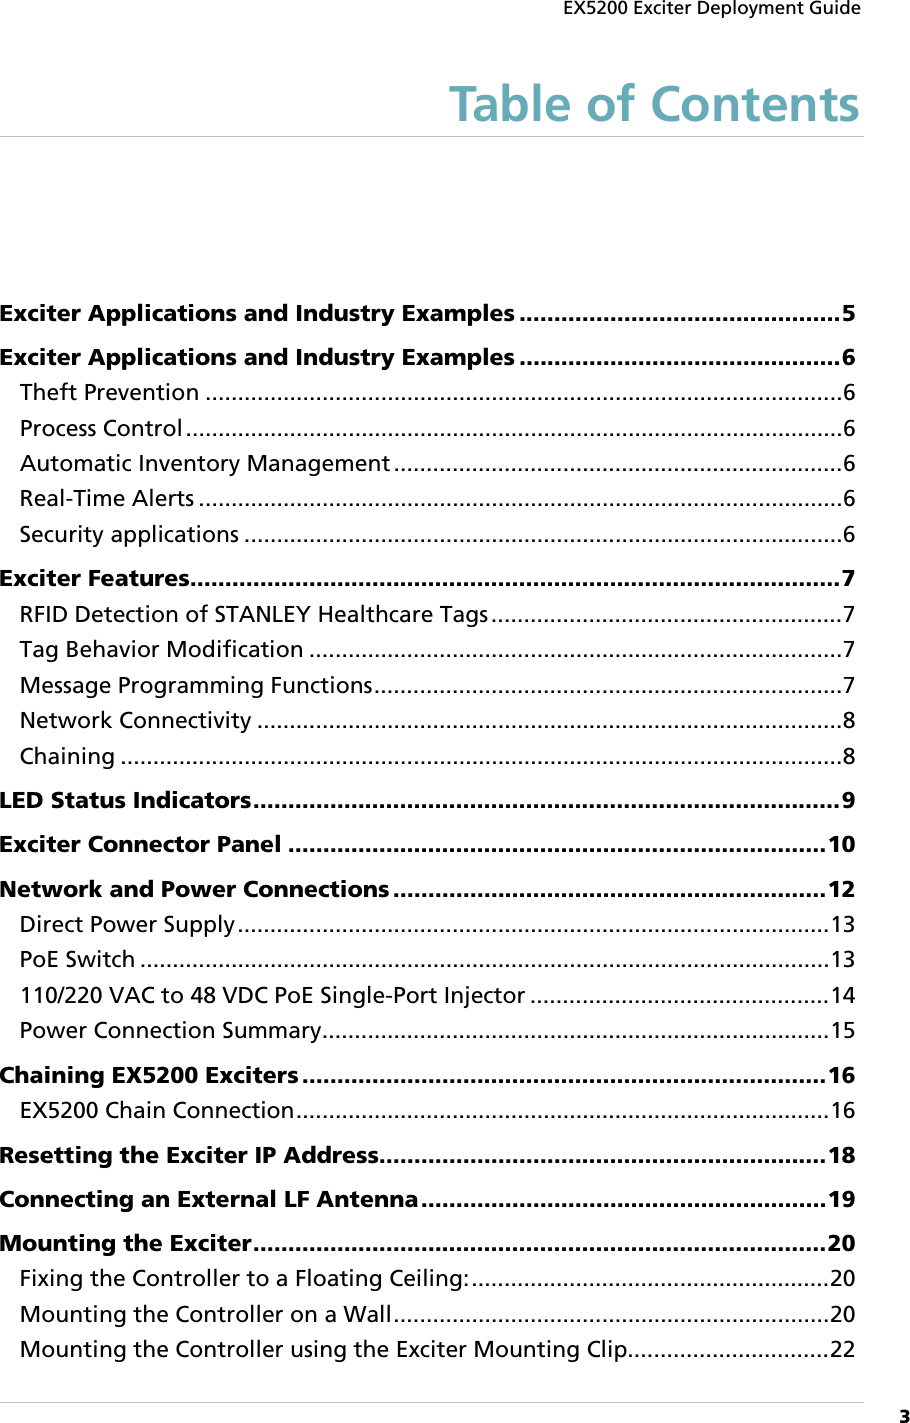 EX5200 Exciter Deployment Guide      3  Table of Contents Exciter Applications and Industry Examples .............................................. 5 Exciter Applications and Industry Examples .............................................. 6 Theft Prevention .................................................................................................. 6 Process Control ..................................................................................................... 6 Automatic Inventory Management ..................................................................... 6 Real-Time Alerts ................................................................................................... 6 Security applications ............................................................................................ 6 Exciter Features ............................................................................................. 7 RFID Detection of STANLEY Healthcare Tags ...................................................... 7 Tag Behavior Modification .................................................................................. 7 Message Programming Functions ........................................................................ 7 Network Connectivity .......................................................................................... 8 Chaining ............................................................................................................... 8 LED Status Indicators .................................................................................... 9 Exciter Connector Panel ............................................................................. 10 Network and Power Connections .............................................................. 12 Direct Power Supply ........................................................................................... 13 PoE Switch .......................................................................................................... 13 110/220 VAC to 48 VDC PoE Single-Port Injector .............................................. 14 Power Connection Summary .............................................................................. 15 Chaining EX5200 Exciters ........................................................................... 16 EX5200 Chain Connection .................................................................................. 16 Resetting the Exciter IP Address ................................................................ 18 Connecting an External LF Antenna .......................................................... 19 Mounting the Exciter .................................................................................. 20 Fixing the Controller to a Floating Ceiling: ....................................................... 20 Mounting the Controller on a Wall ................................................................... 20 Mounting the Controller using the Exciter Mounting Clip ............................... 22 